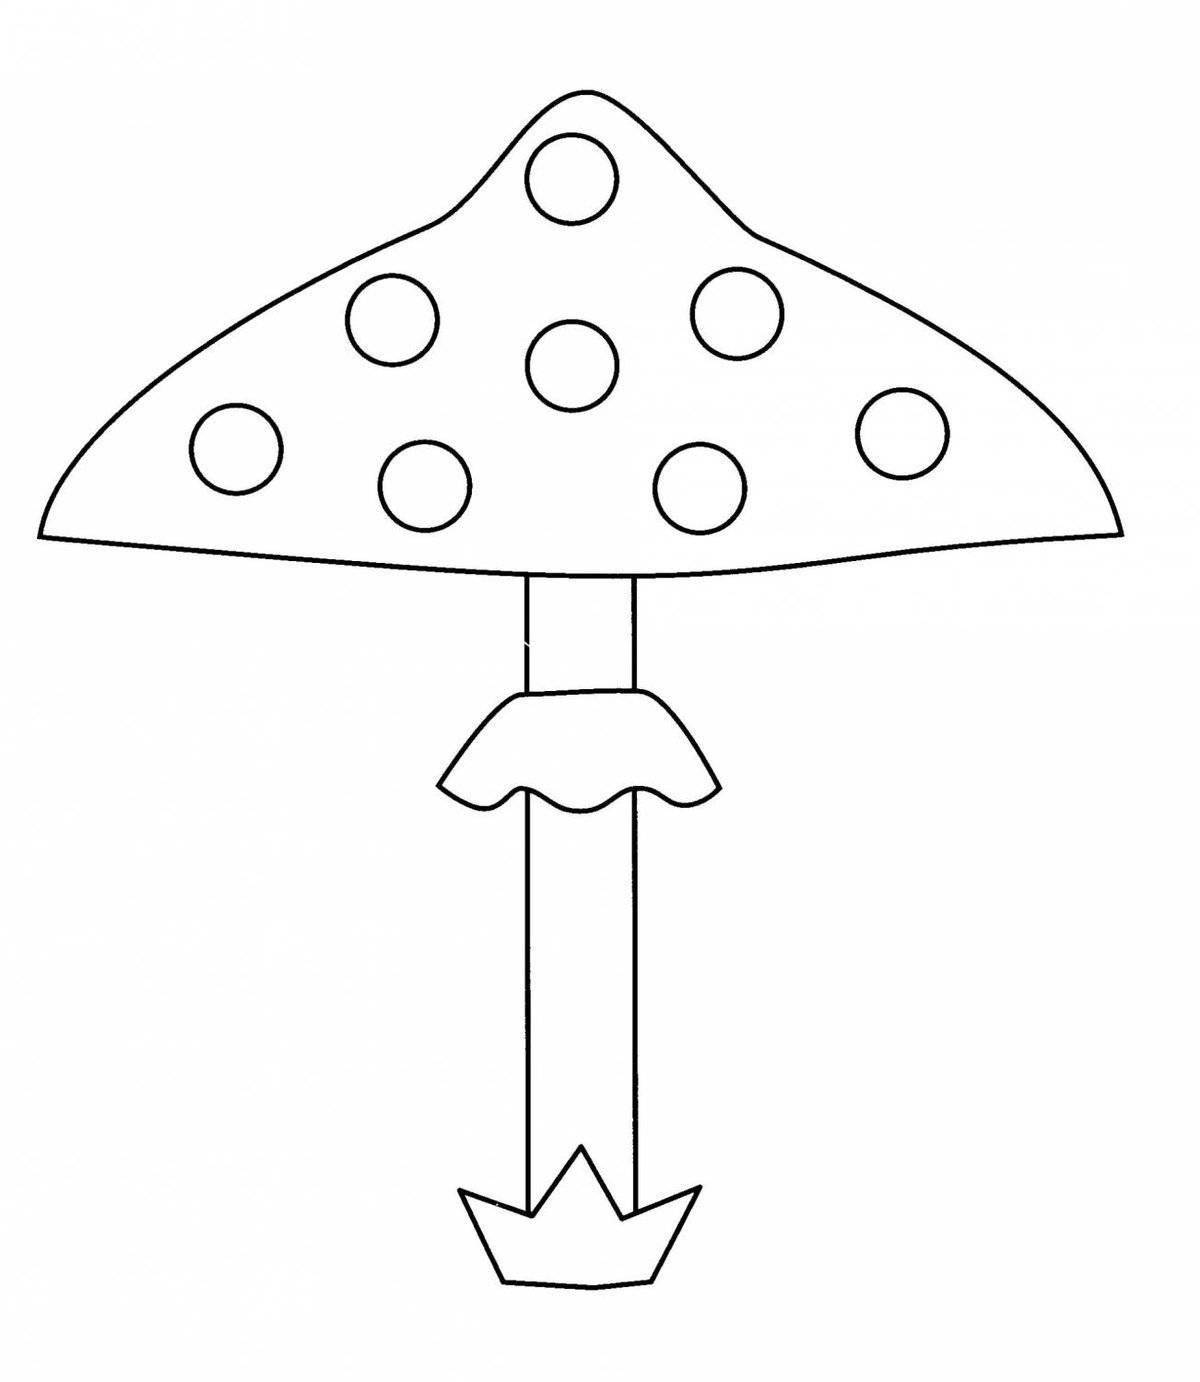 Coloring playful toadstool